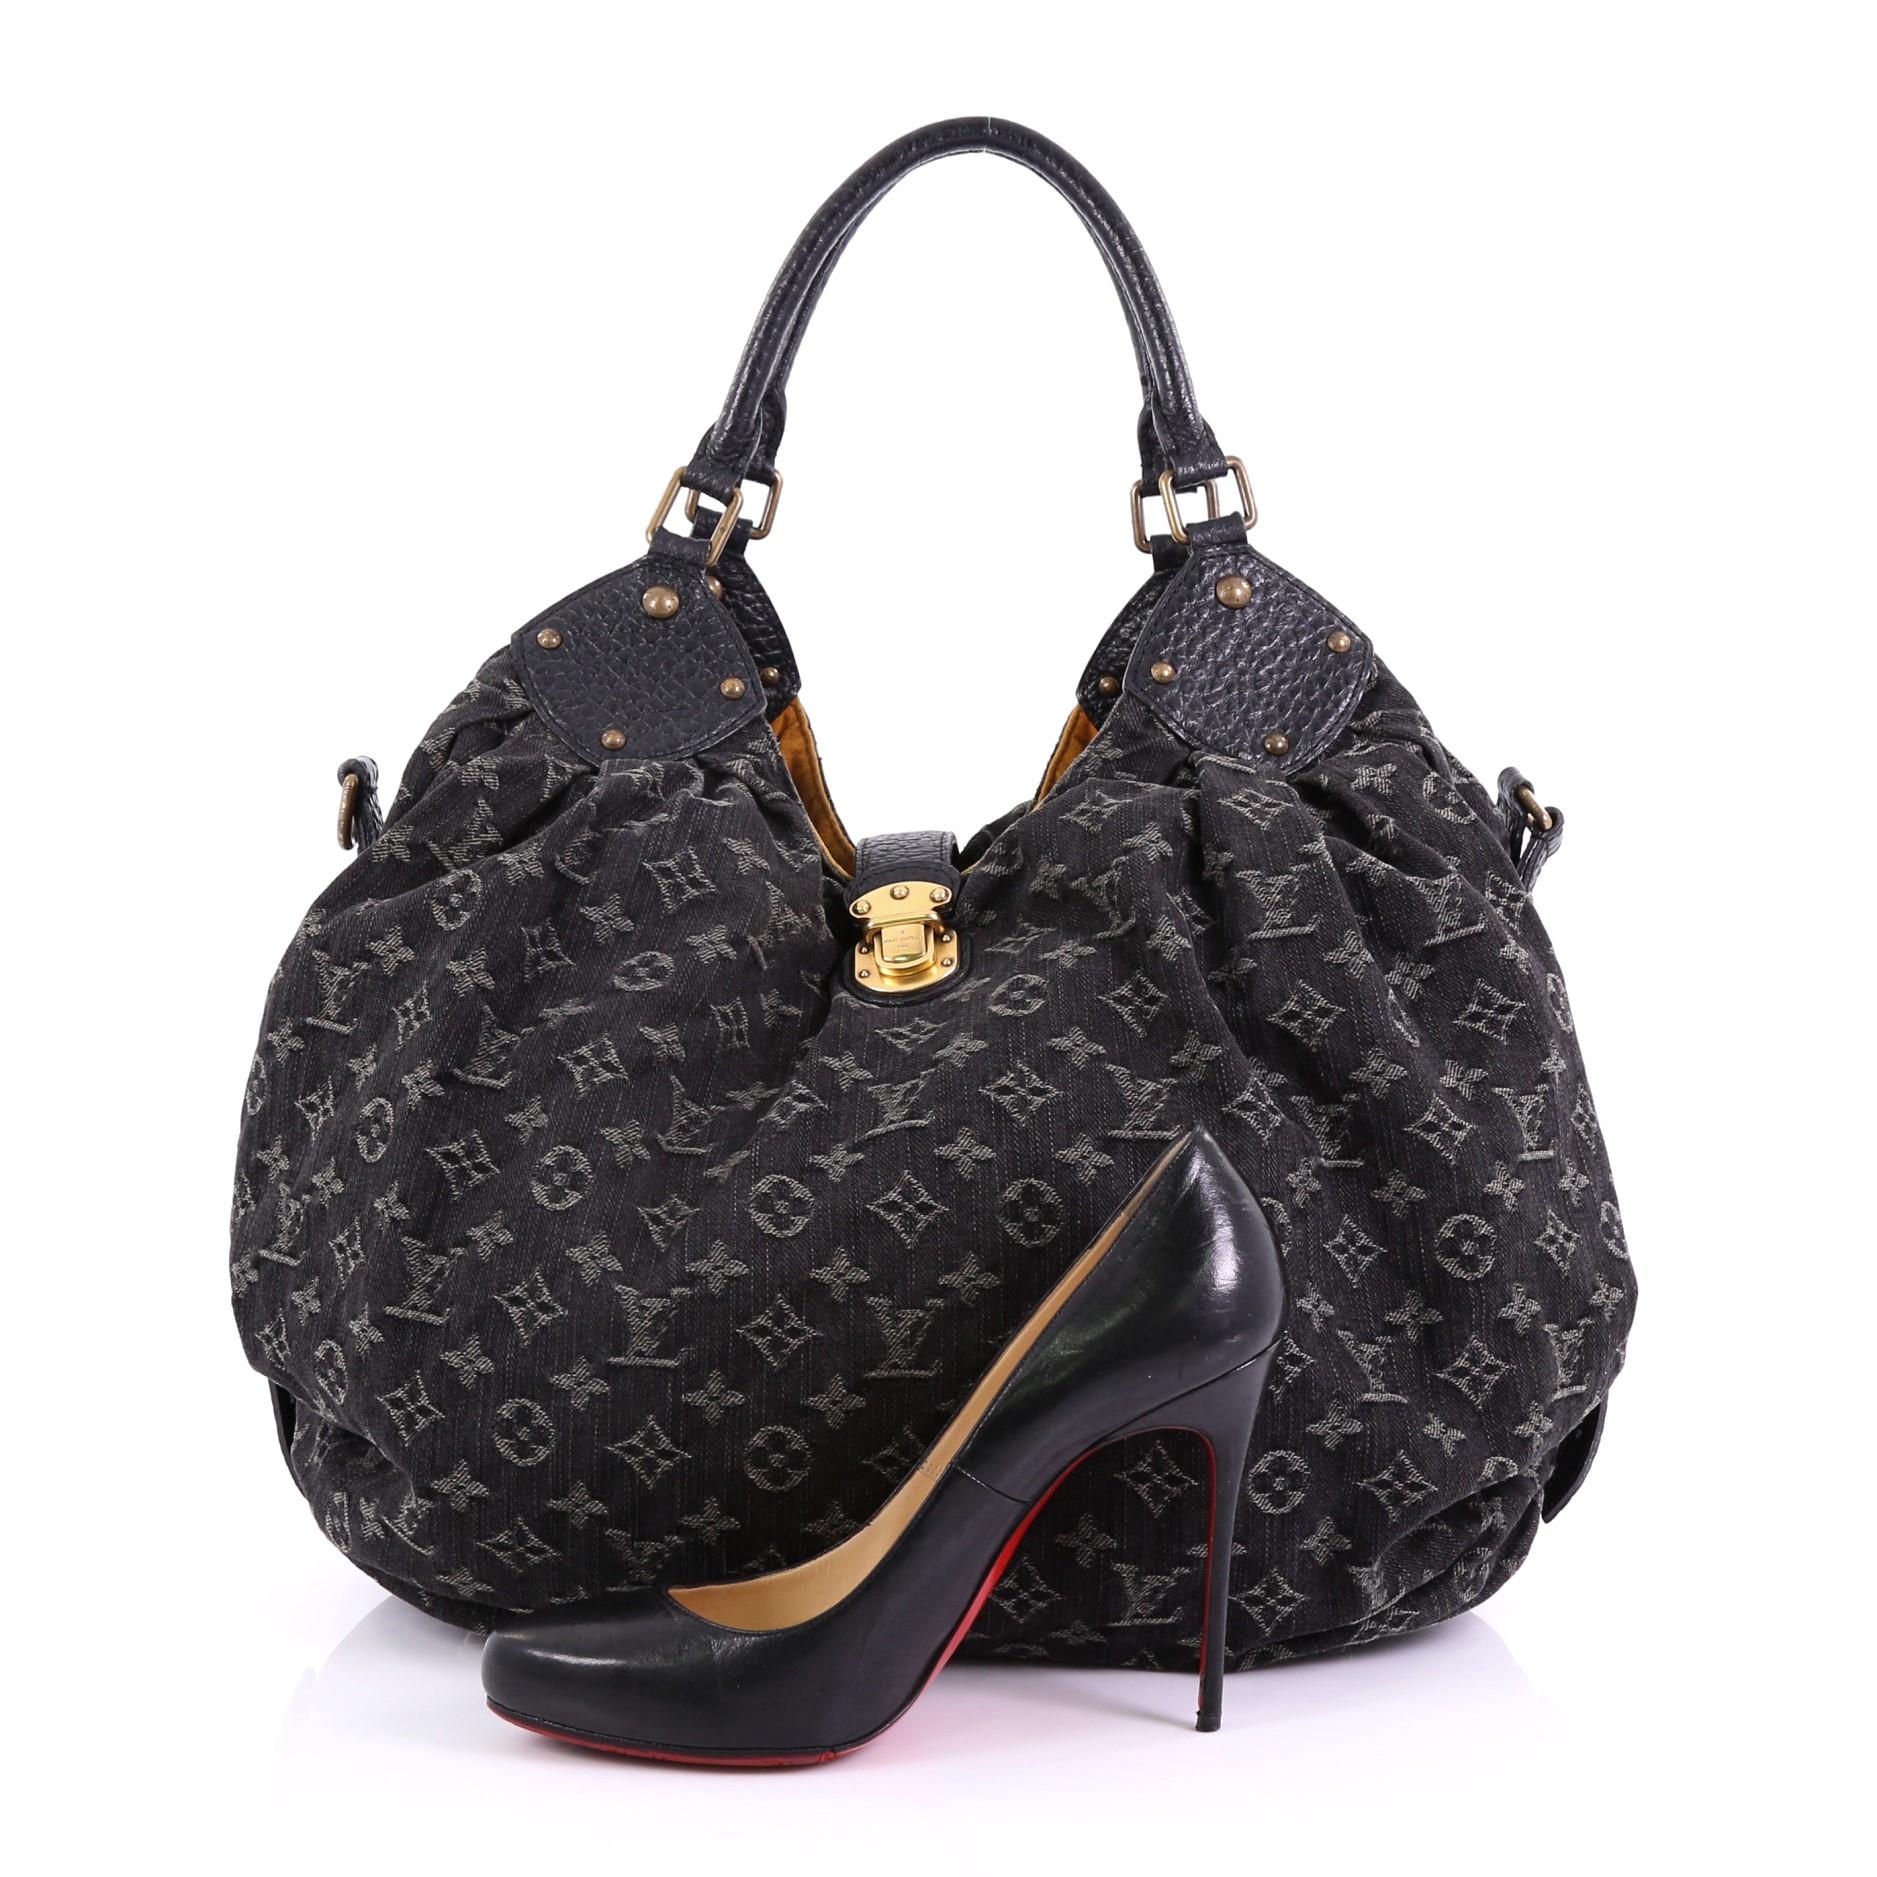 This Louis Vuitton XL Hobo Denim, crafted from black monogram denim, features dual rolled handles, protective base studs, belts on both sides, and aged gold-tone hardware. Its leather tab with push-lock closure opens to a yellow microfiber interior